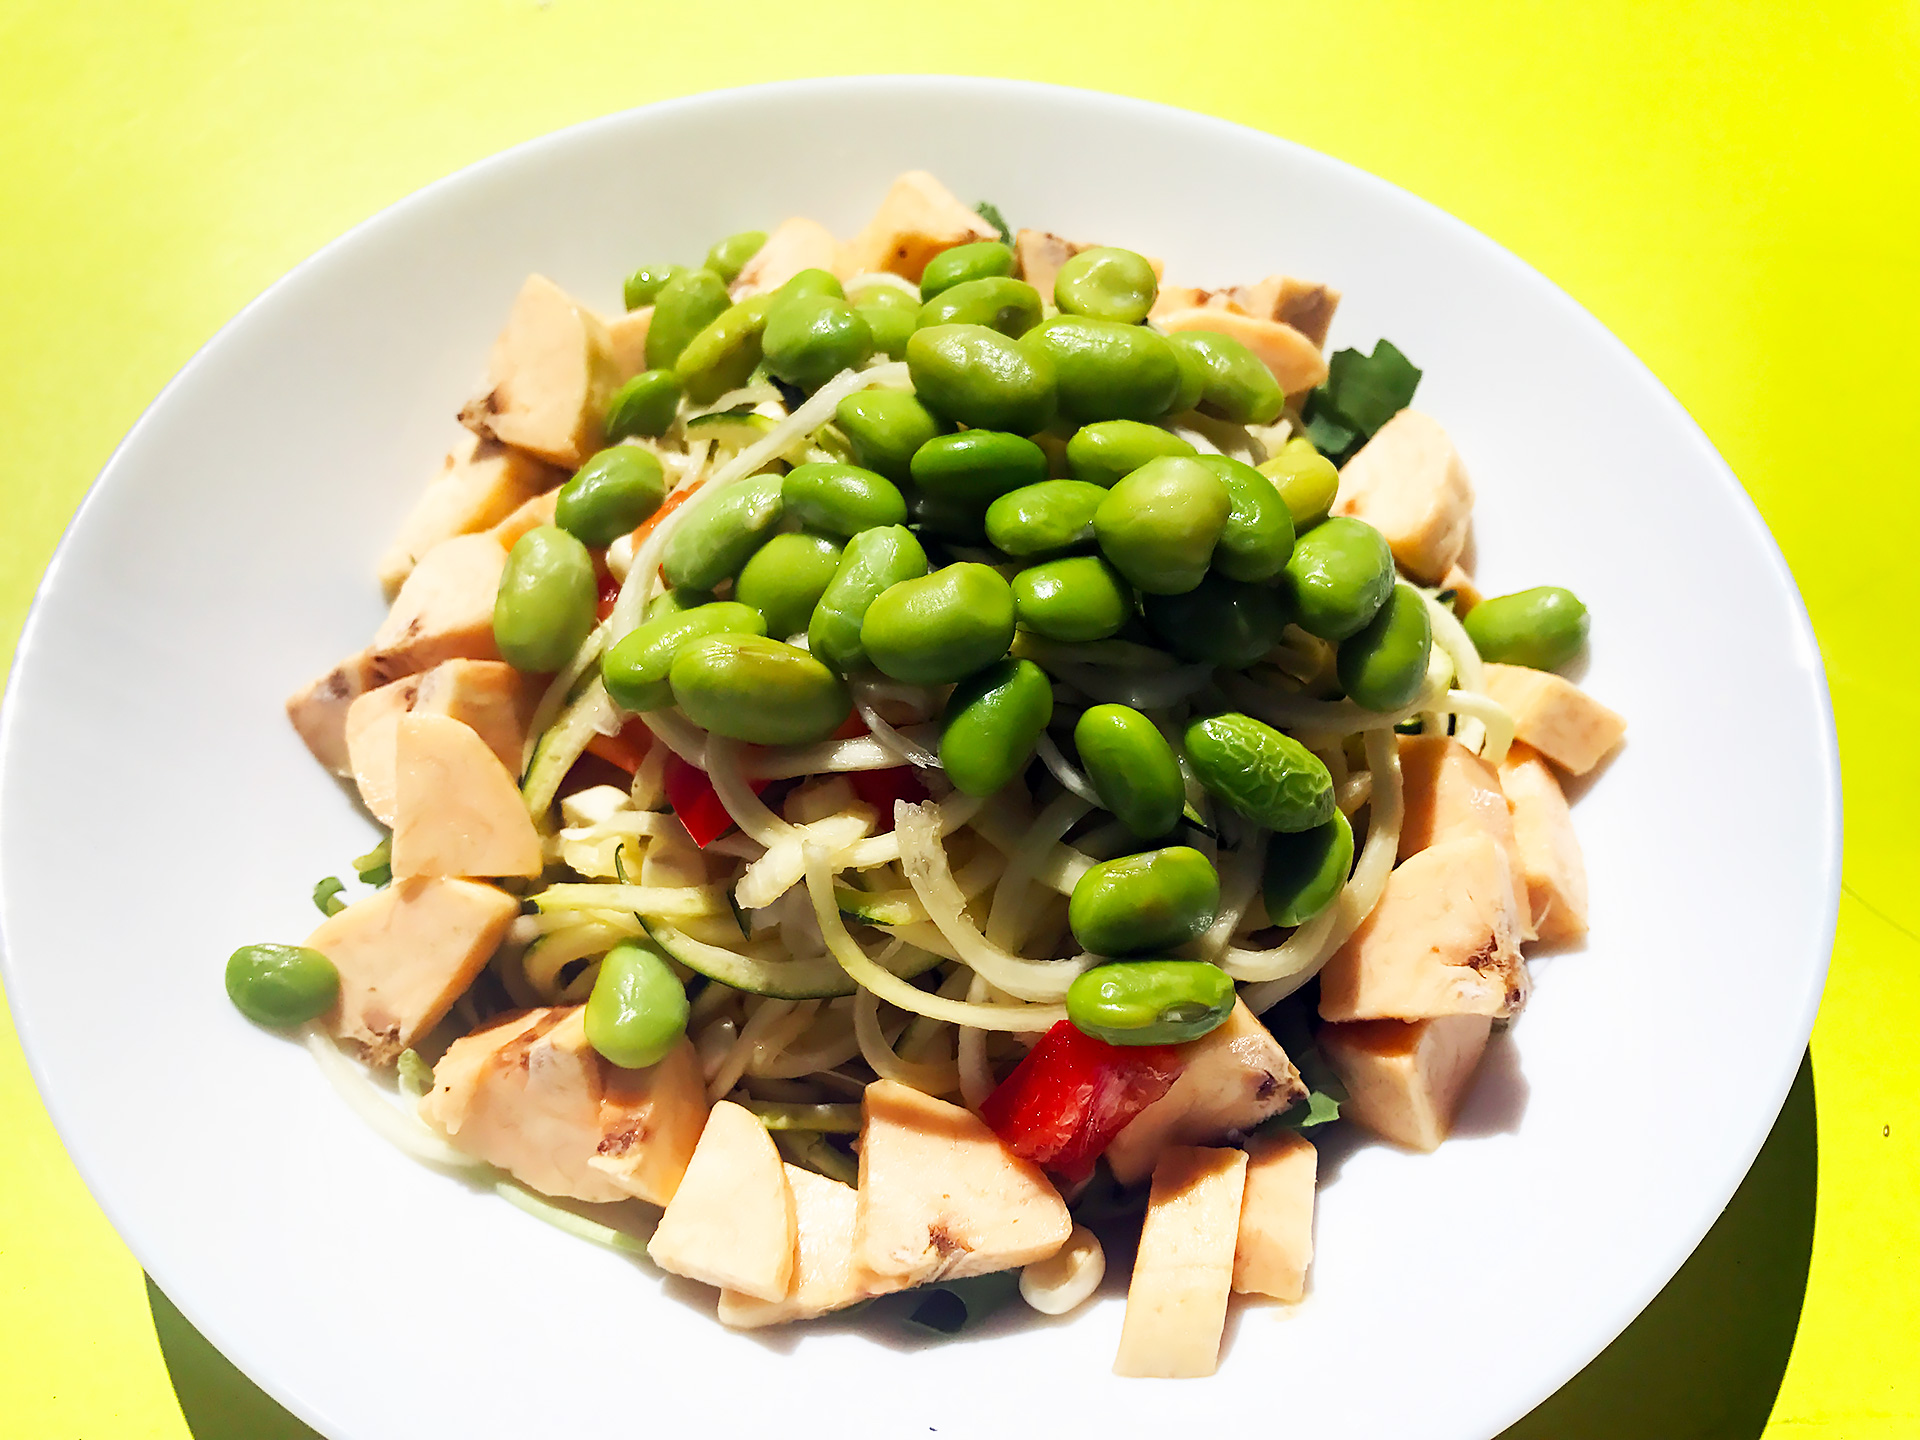 A raw plantain salad with edamame.